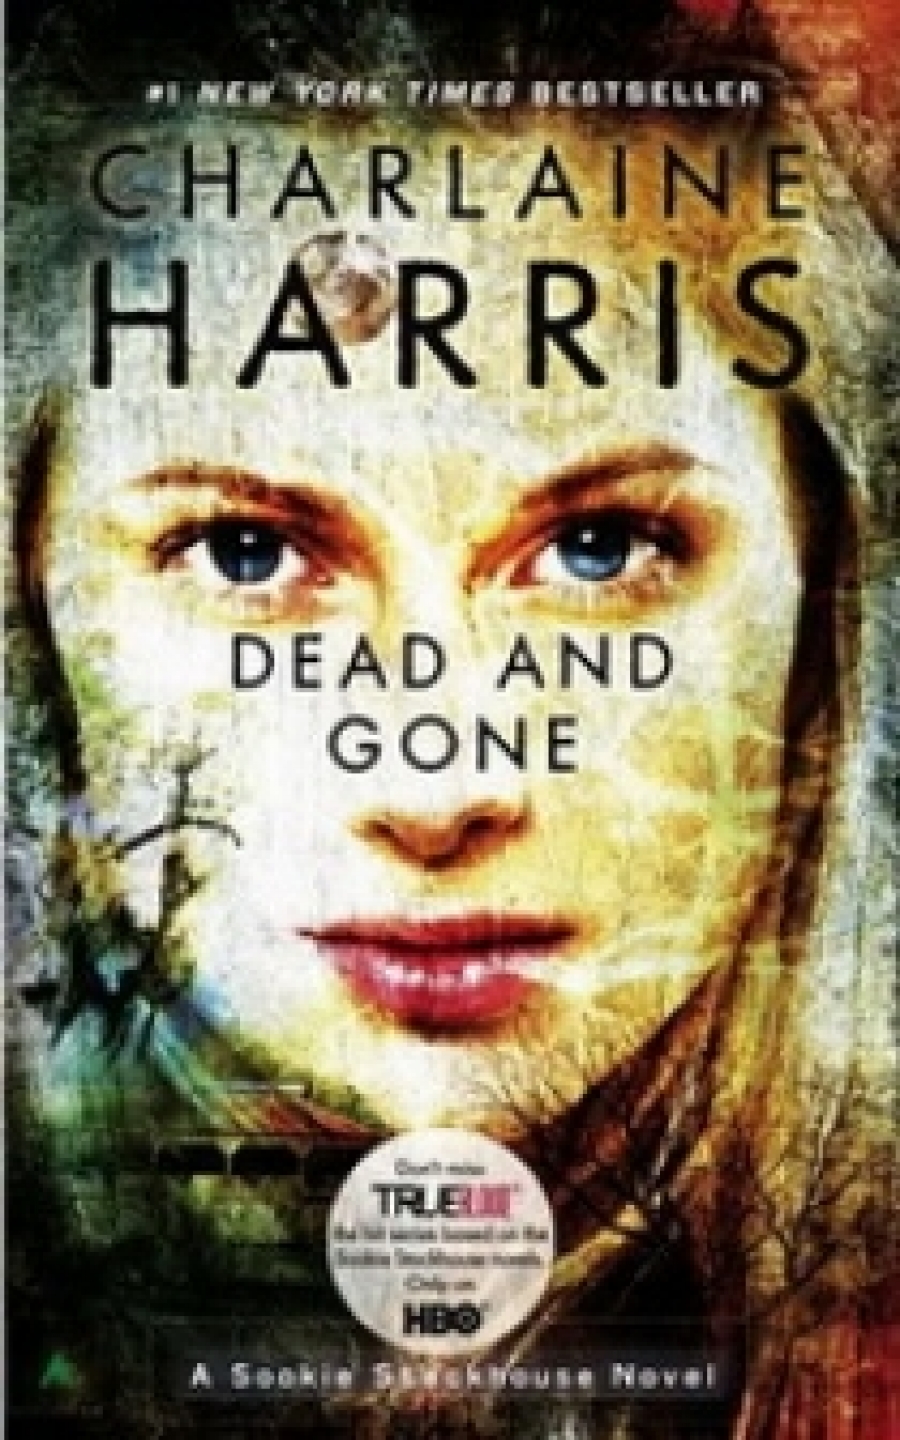 Charlaine H. Dead and Gone (True Blood) 